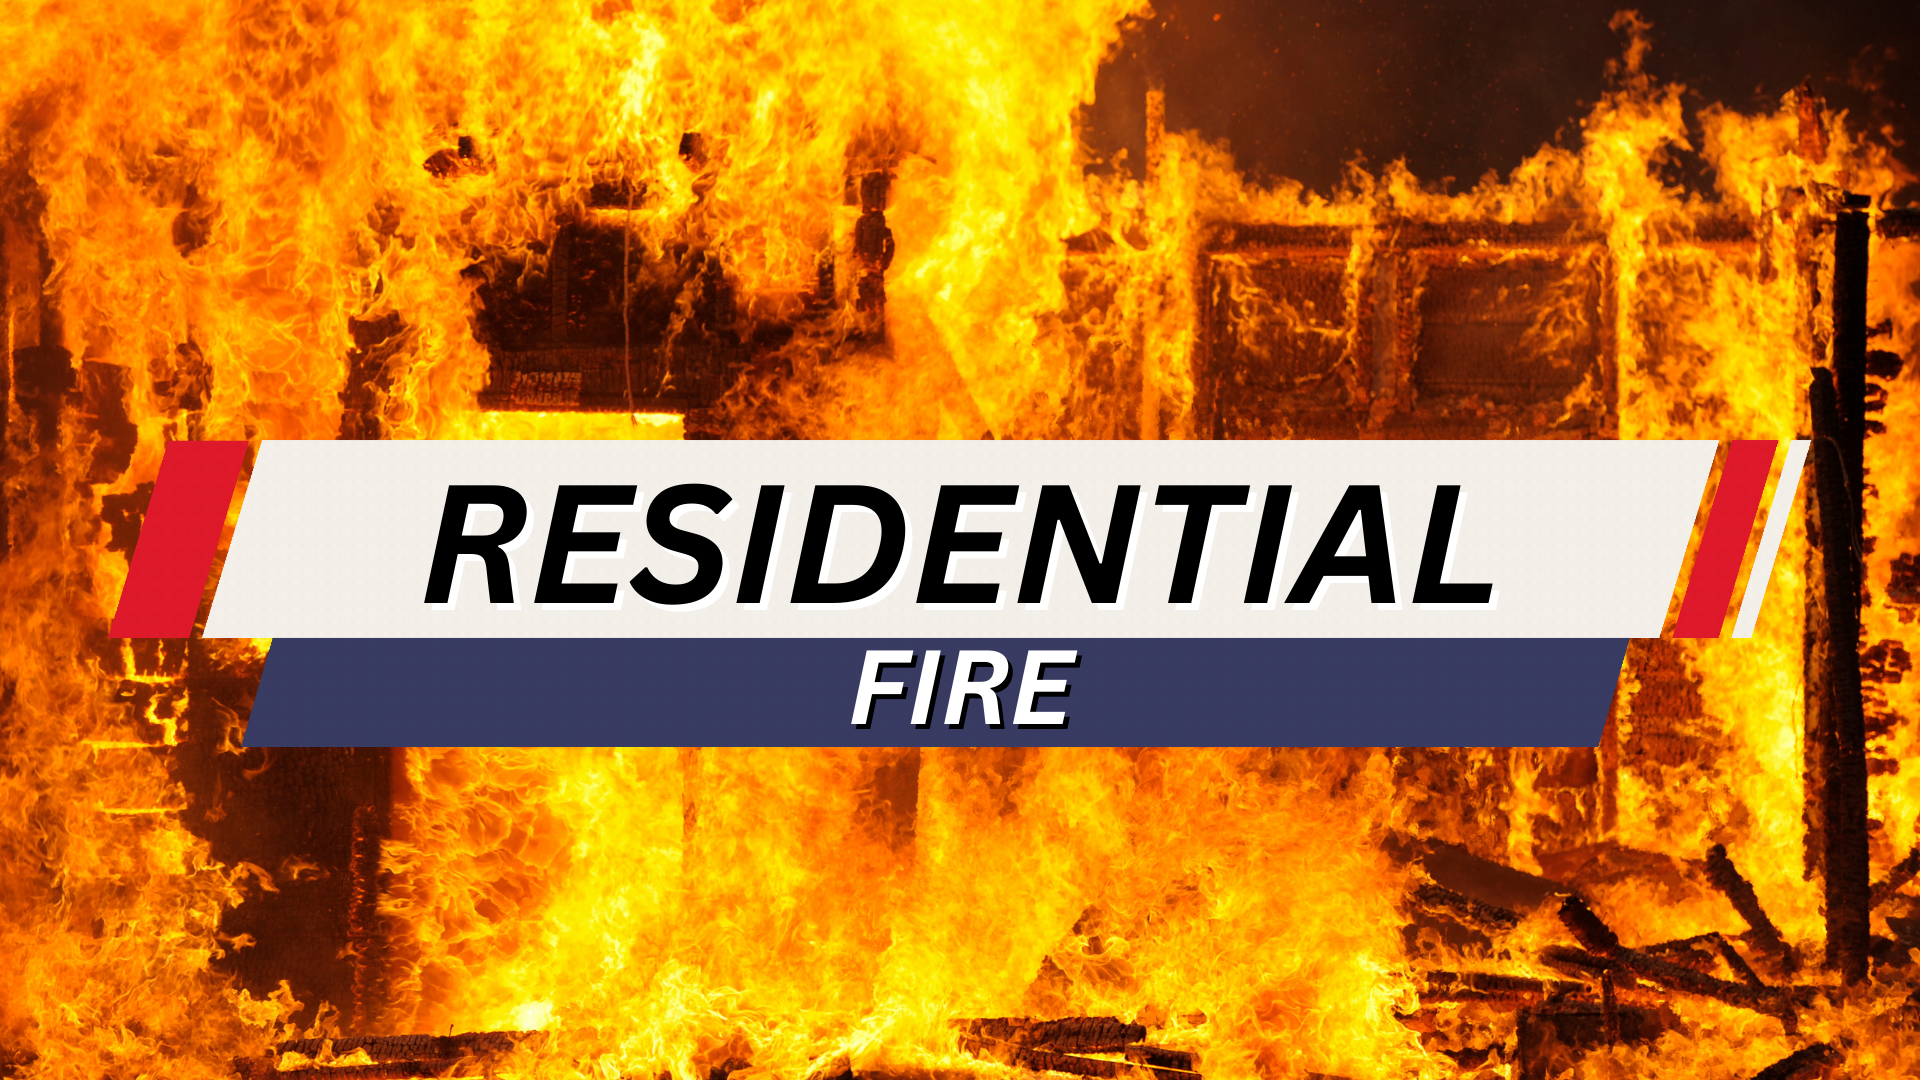 Pilot Knob Home Destroyed in Fire